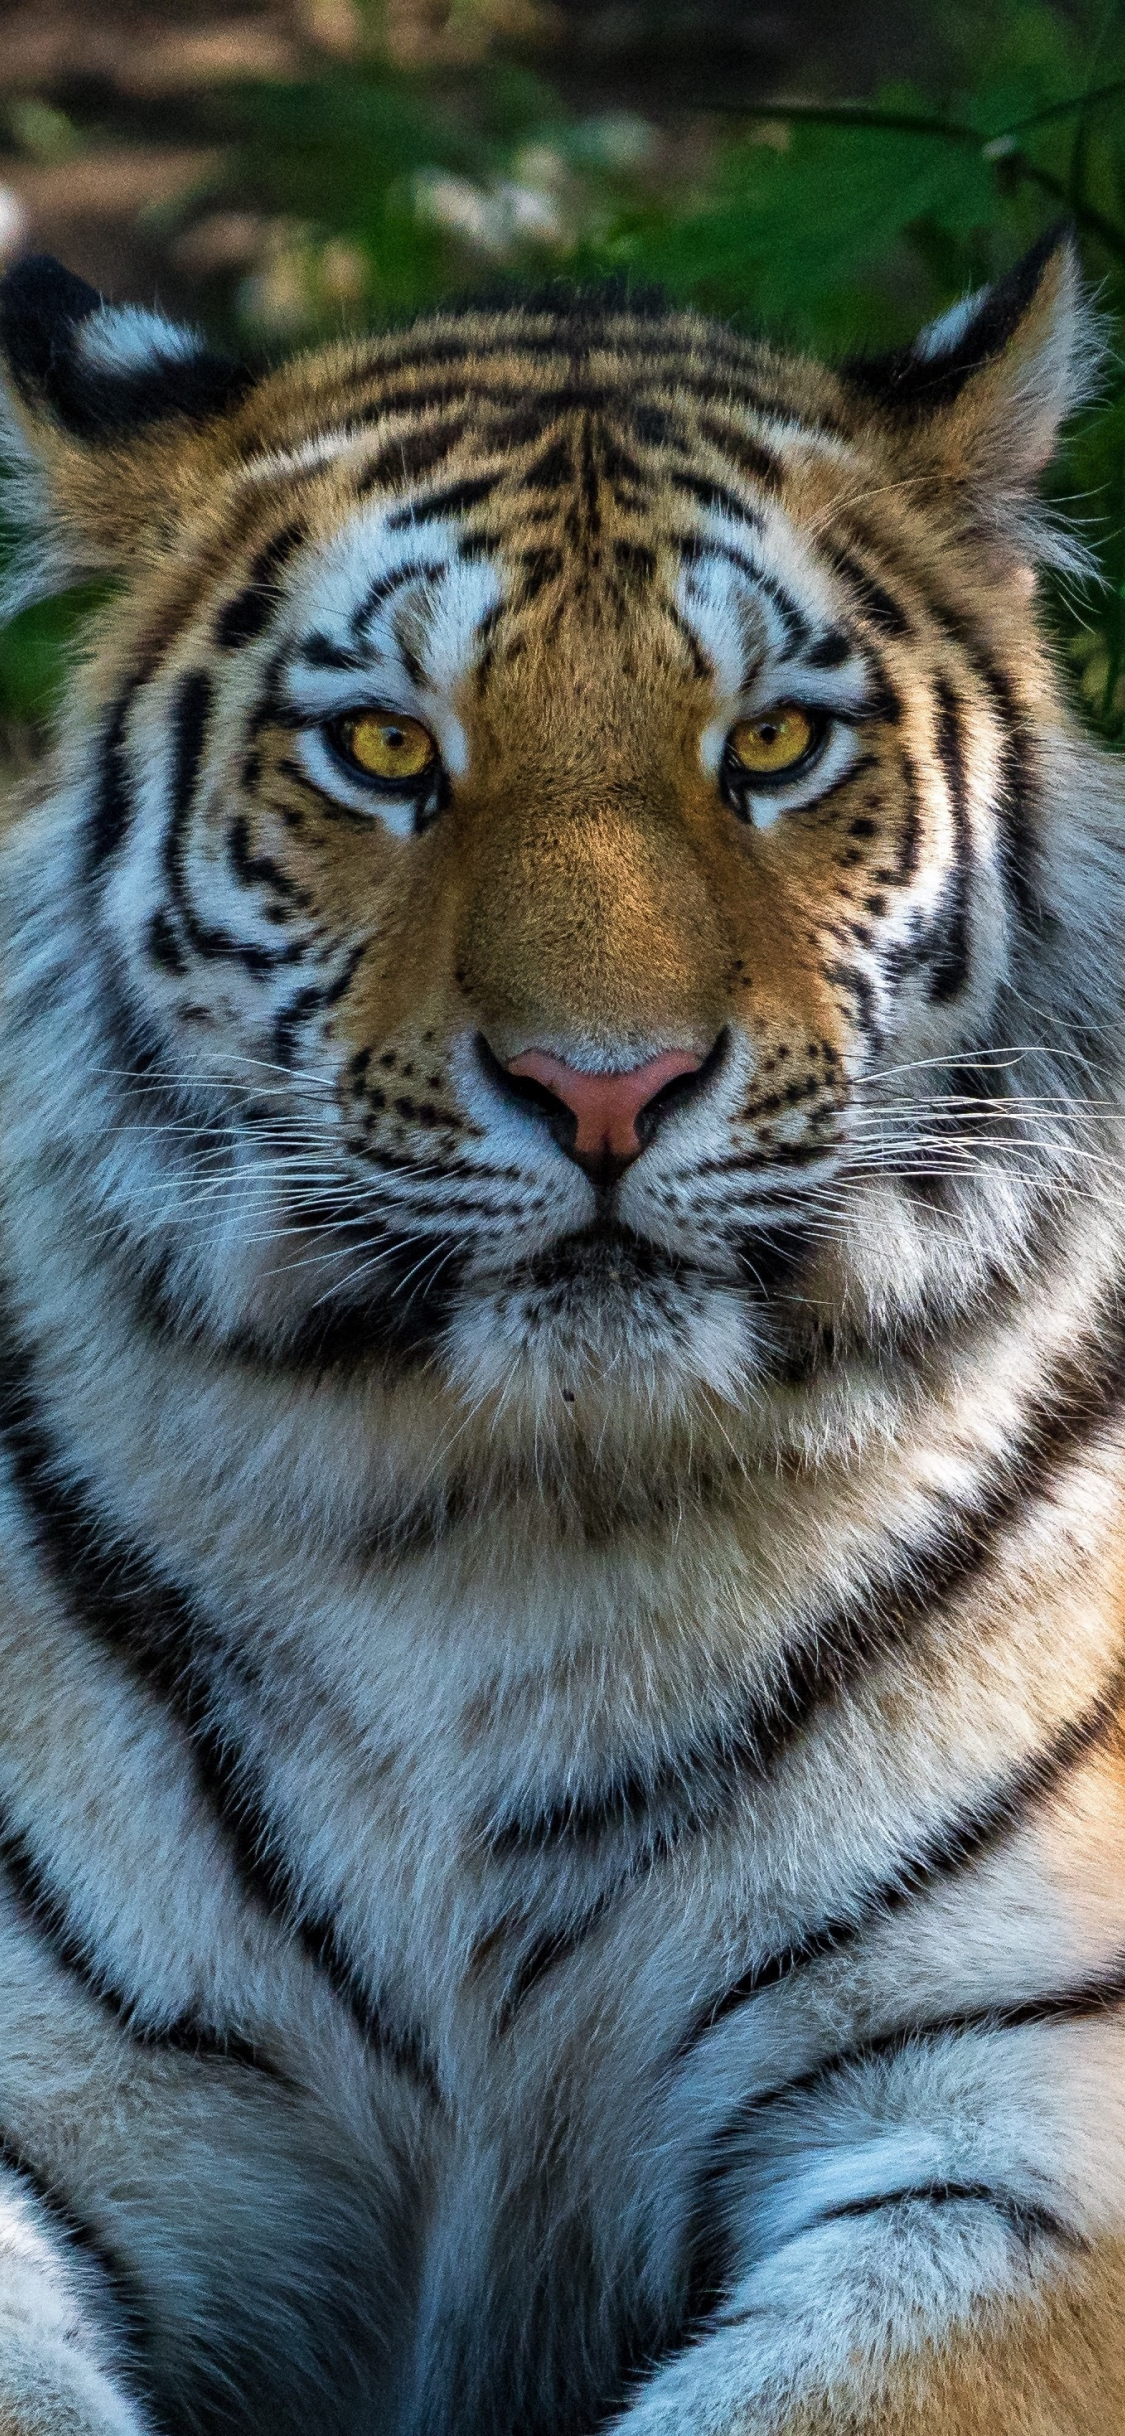 1125x2436 White Tiger Wallpapers for IPhone X / XS [Super Retina HD]